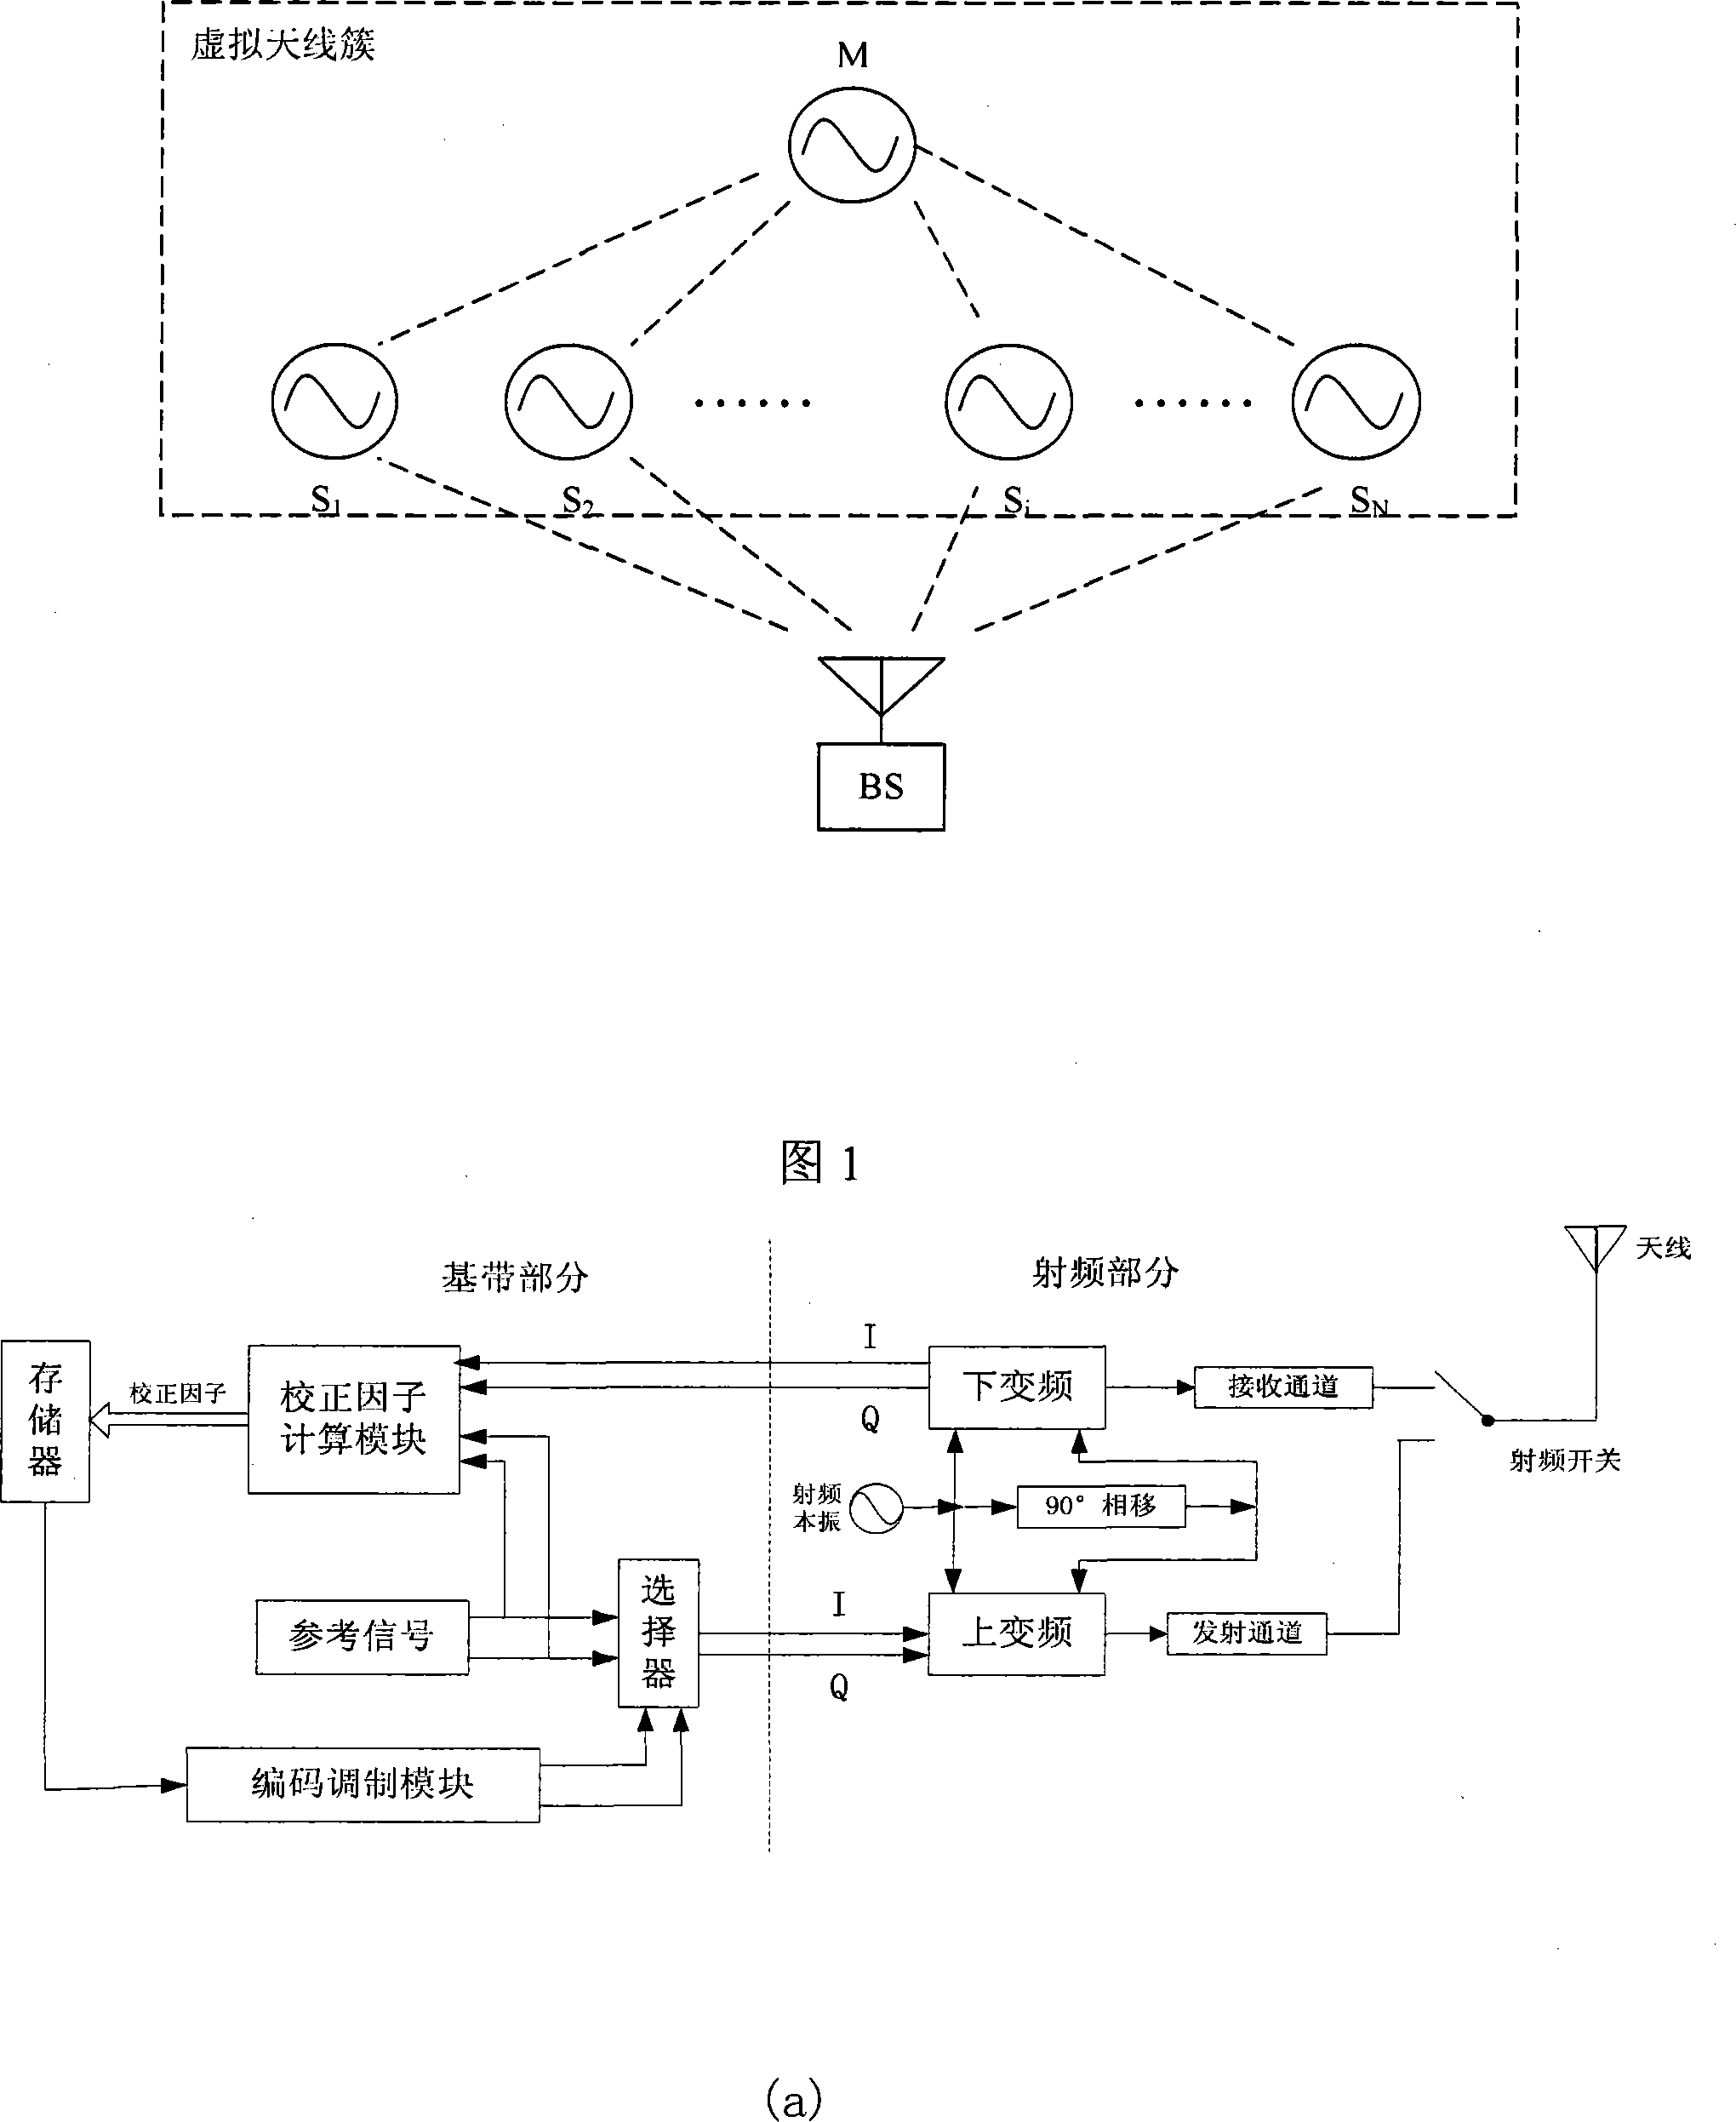 Method for forming distributed aerial array beam based on channel correction